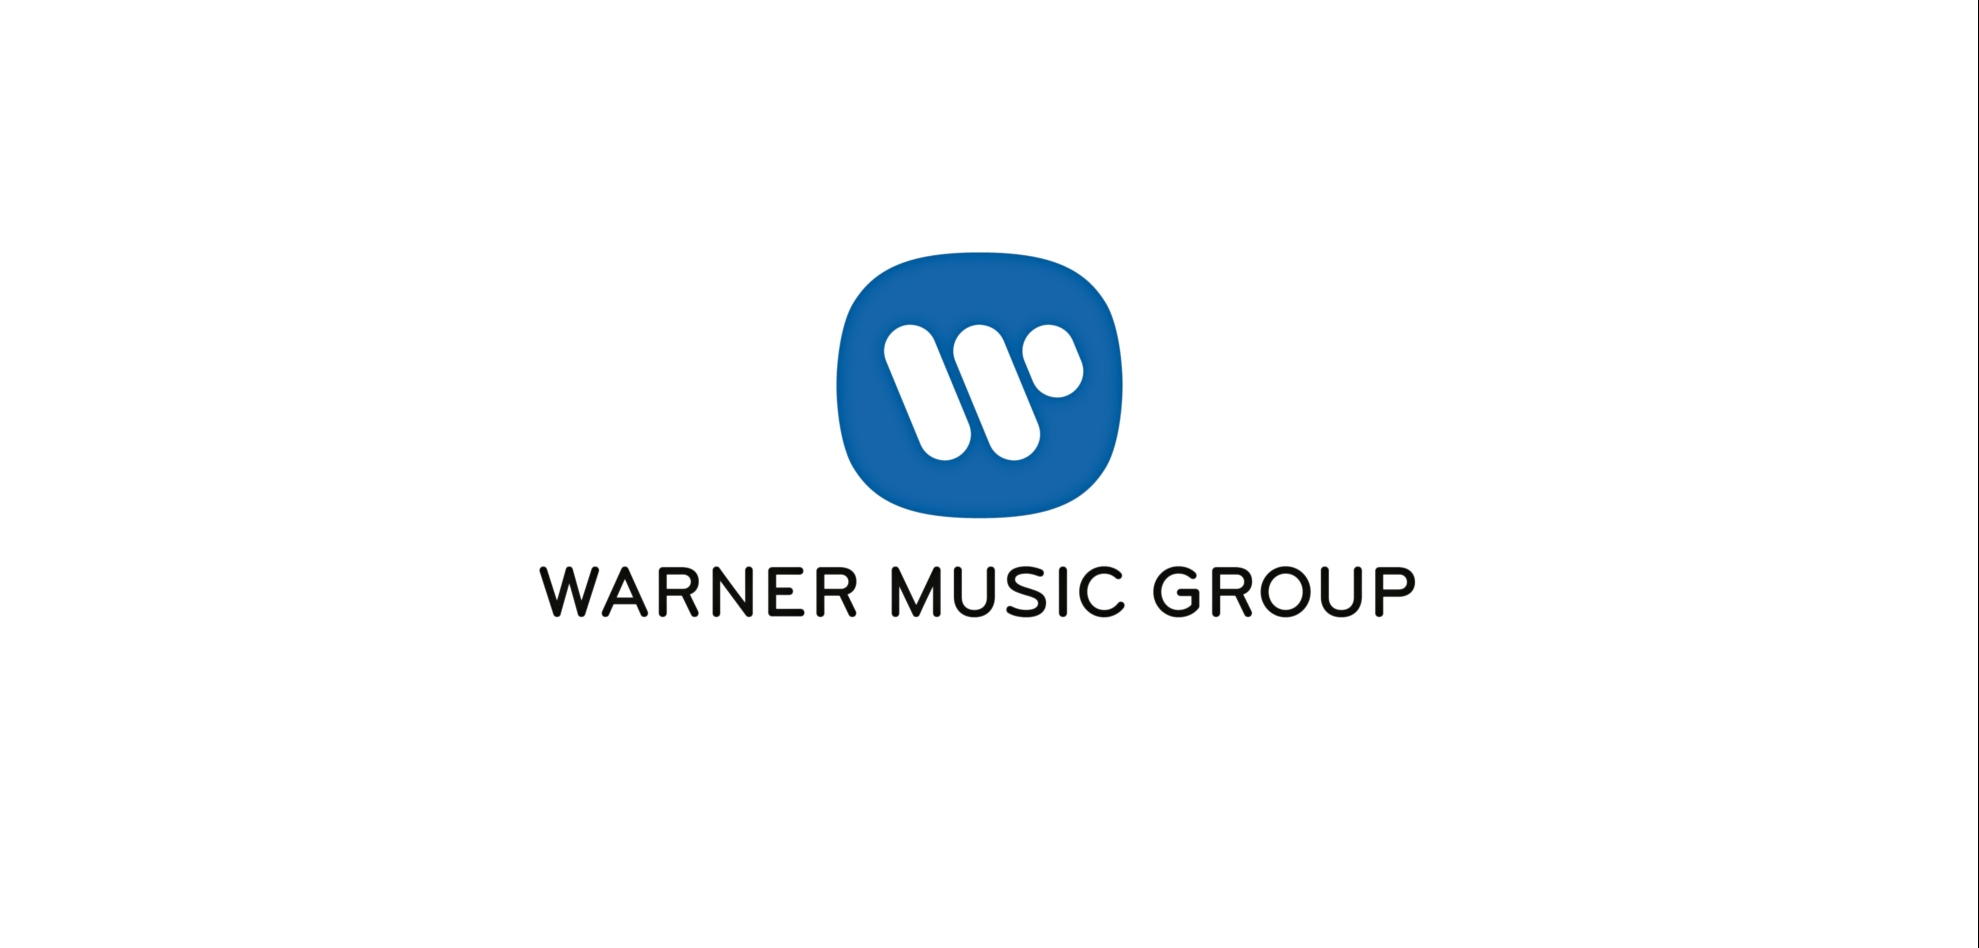 LISA LI APPOINTED AS MANAGING DIRECTOR OF WARNER CHAPPELL MUSIC CHINA